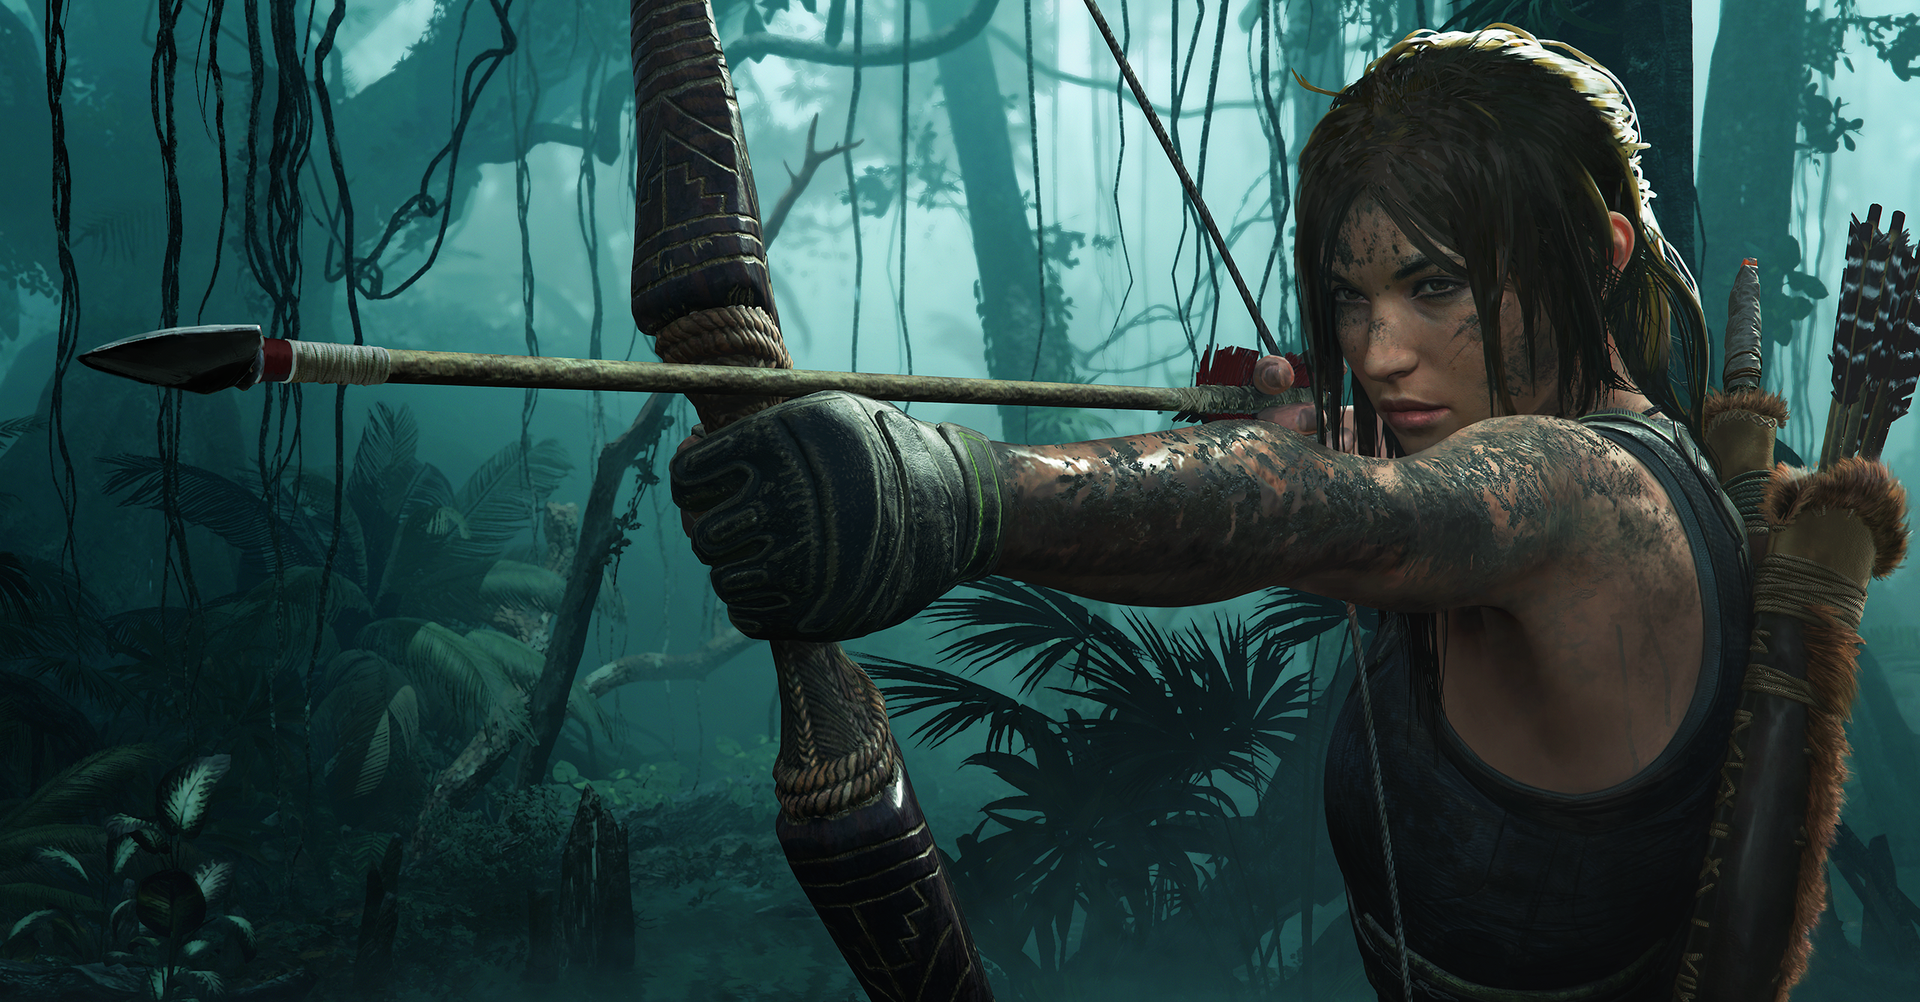 Media asset (photo, screenshot, or image in full size) related to contents posted at 3dfxzone.it | Image Name: shadow-of-the-tomb-raider-official-picture.png